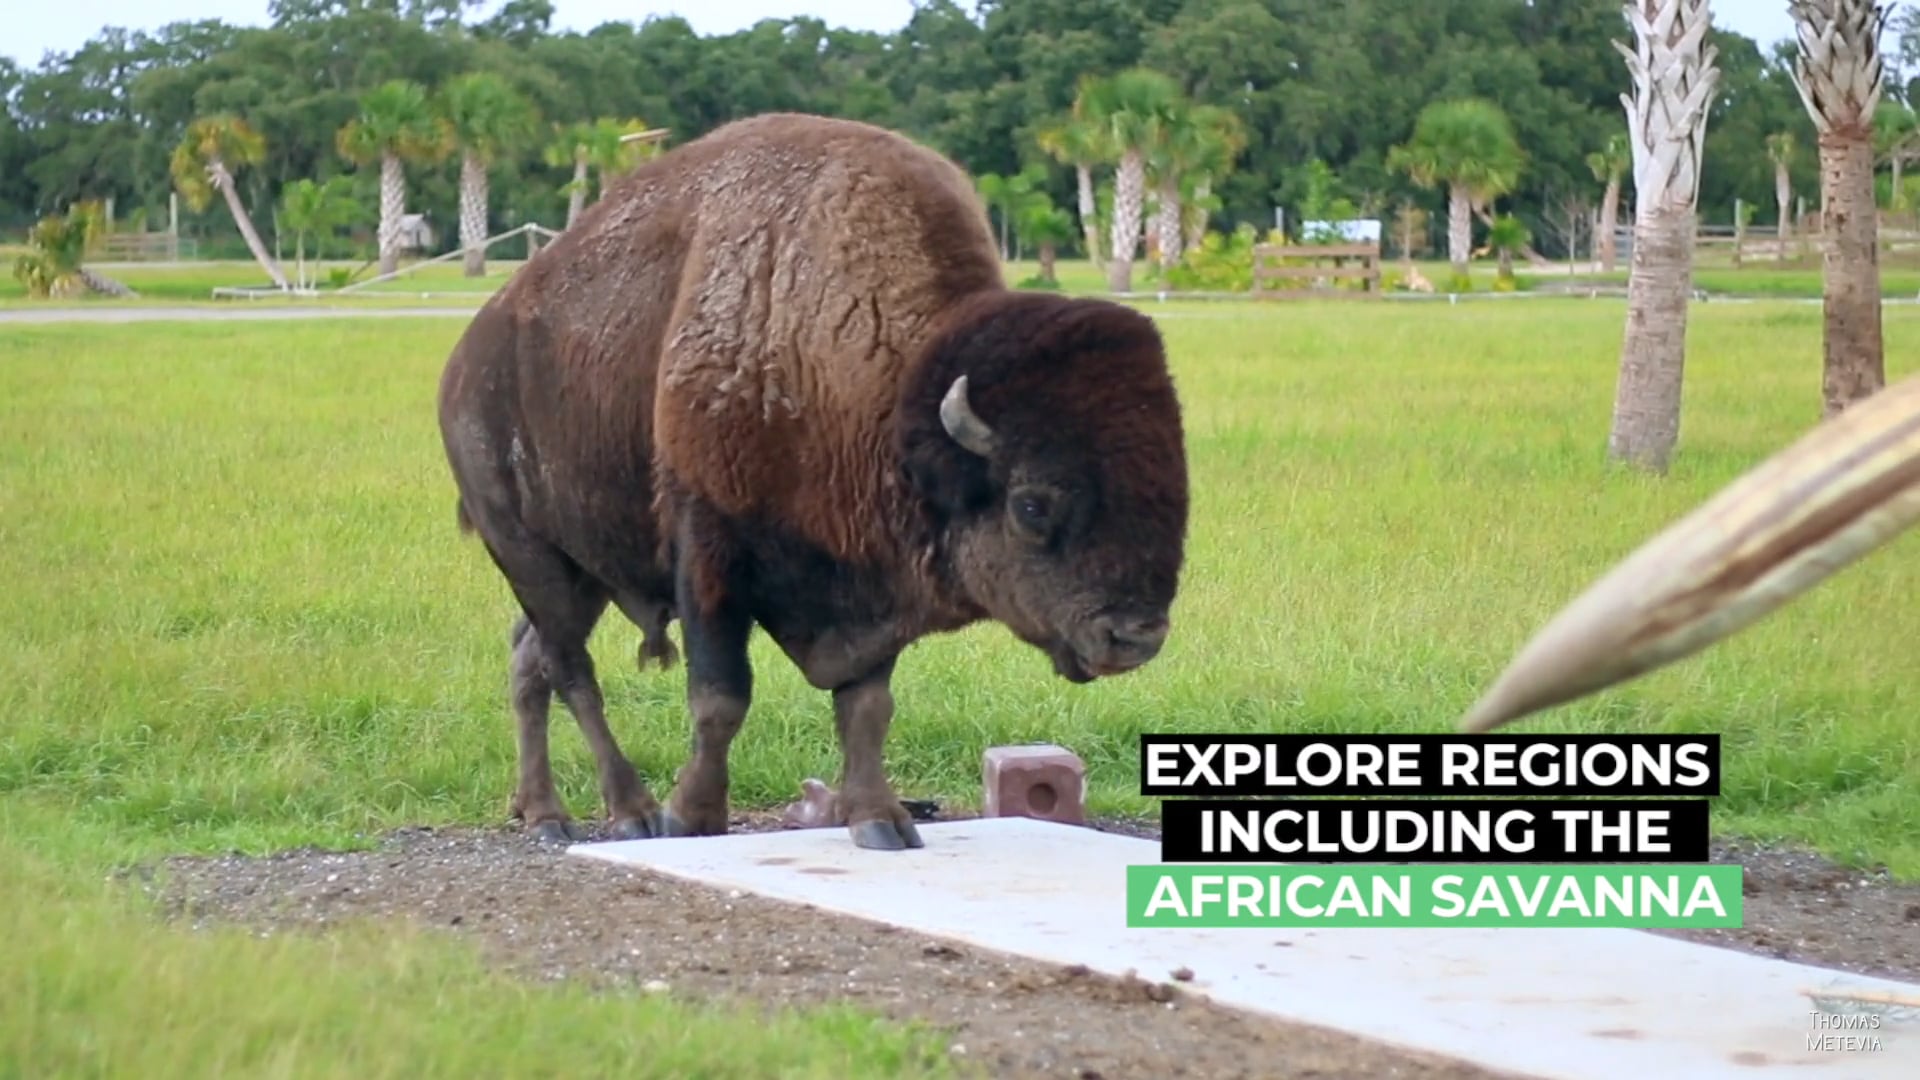 This drive-thru safari just might be the best way to remedy pandemic boredom